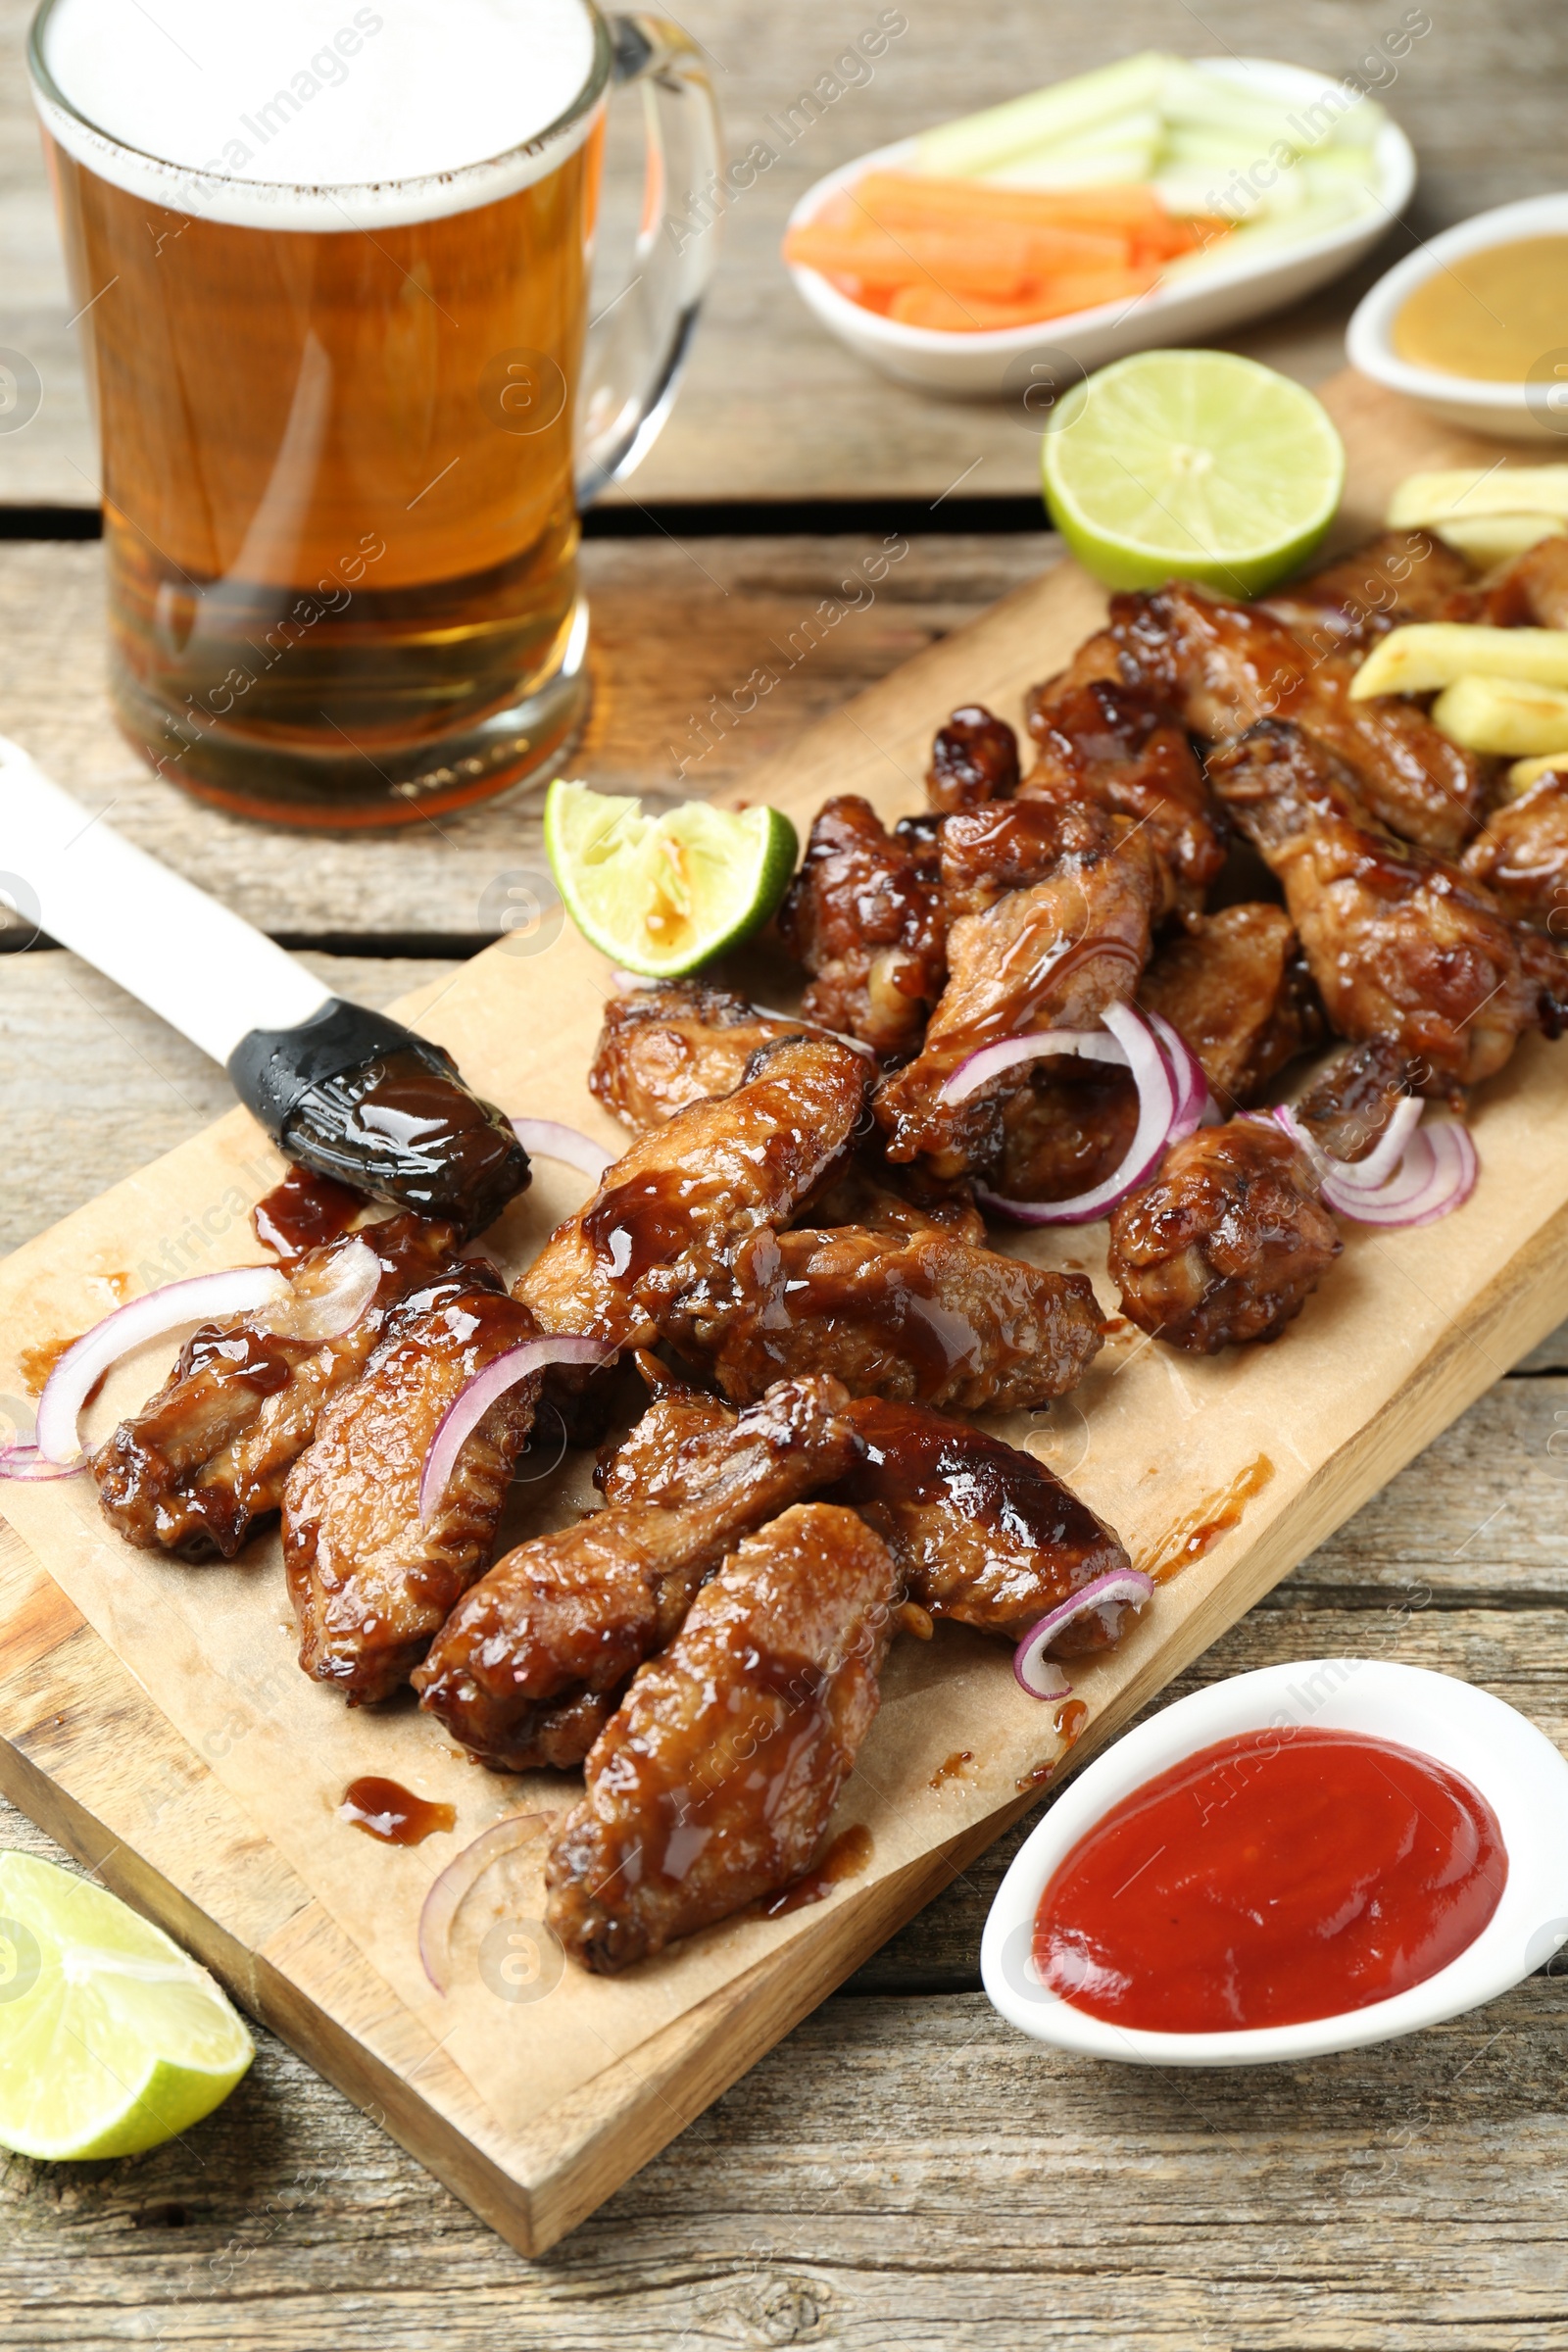 Photo of Tasty roasted chicken wings, mug of beer and sauce on wooden table